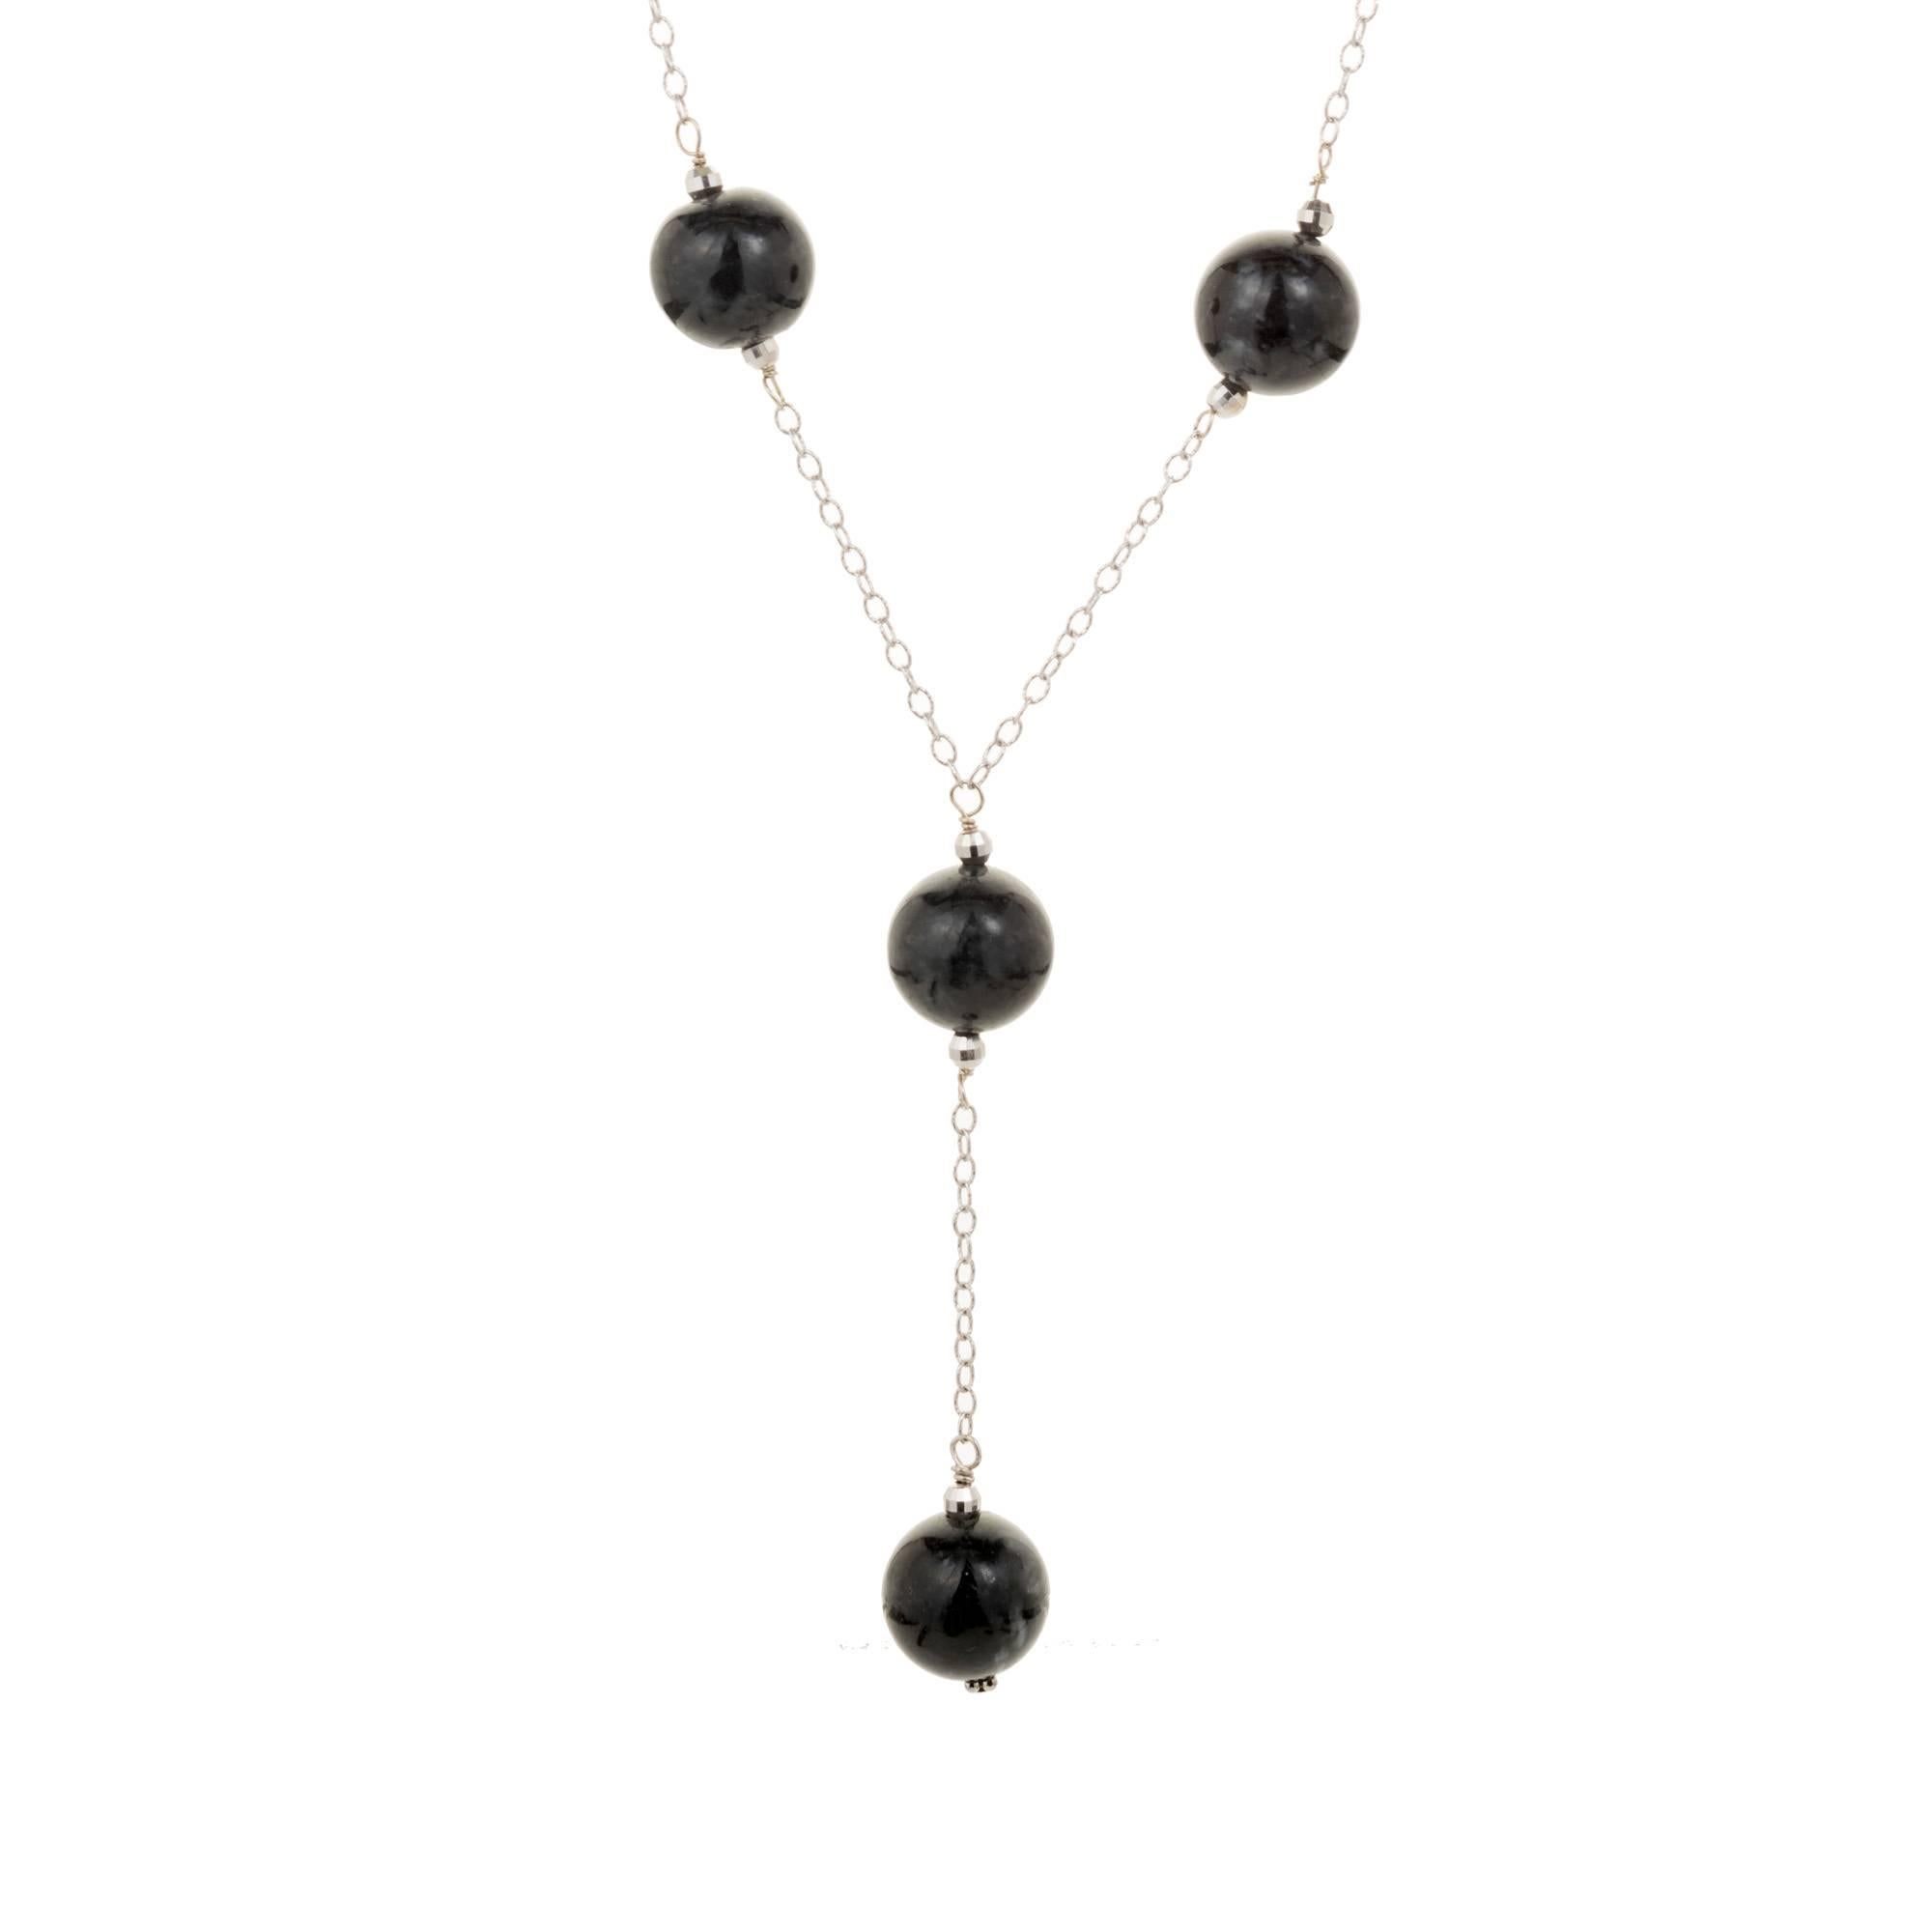 Natural black Jadeite Jade 12mm “Bead By The Yard” style necklace on a 20 inch 14 white gold chain. GIA certified natural Jadeite Jade.

14k white gold
8 round black  Jadeite Jade 12.48 x 12.25mm, GIA certificate #1182601974
28.03 grams
Tested and